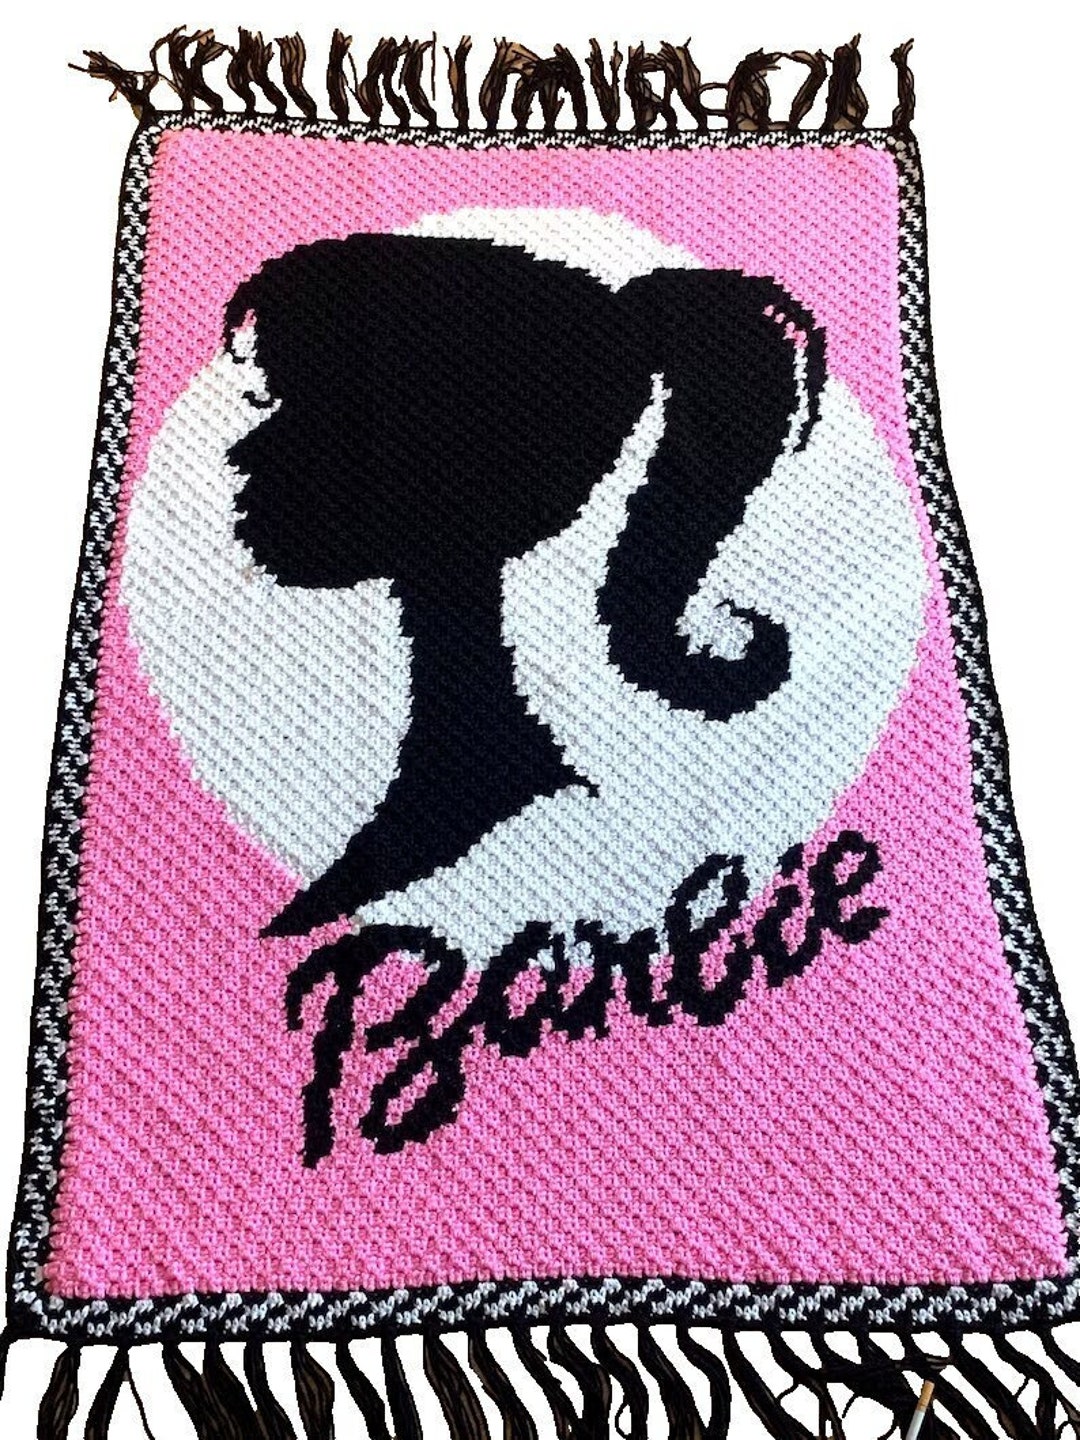 Barbie Silhouette Afghan Throw Blanket Pink, Black and White. 